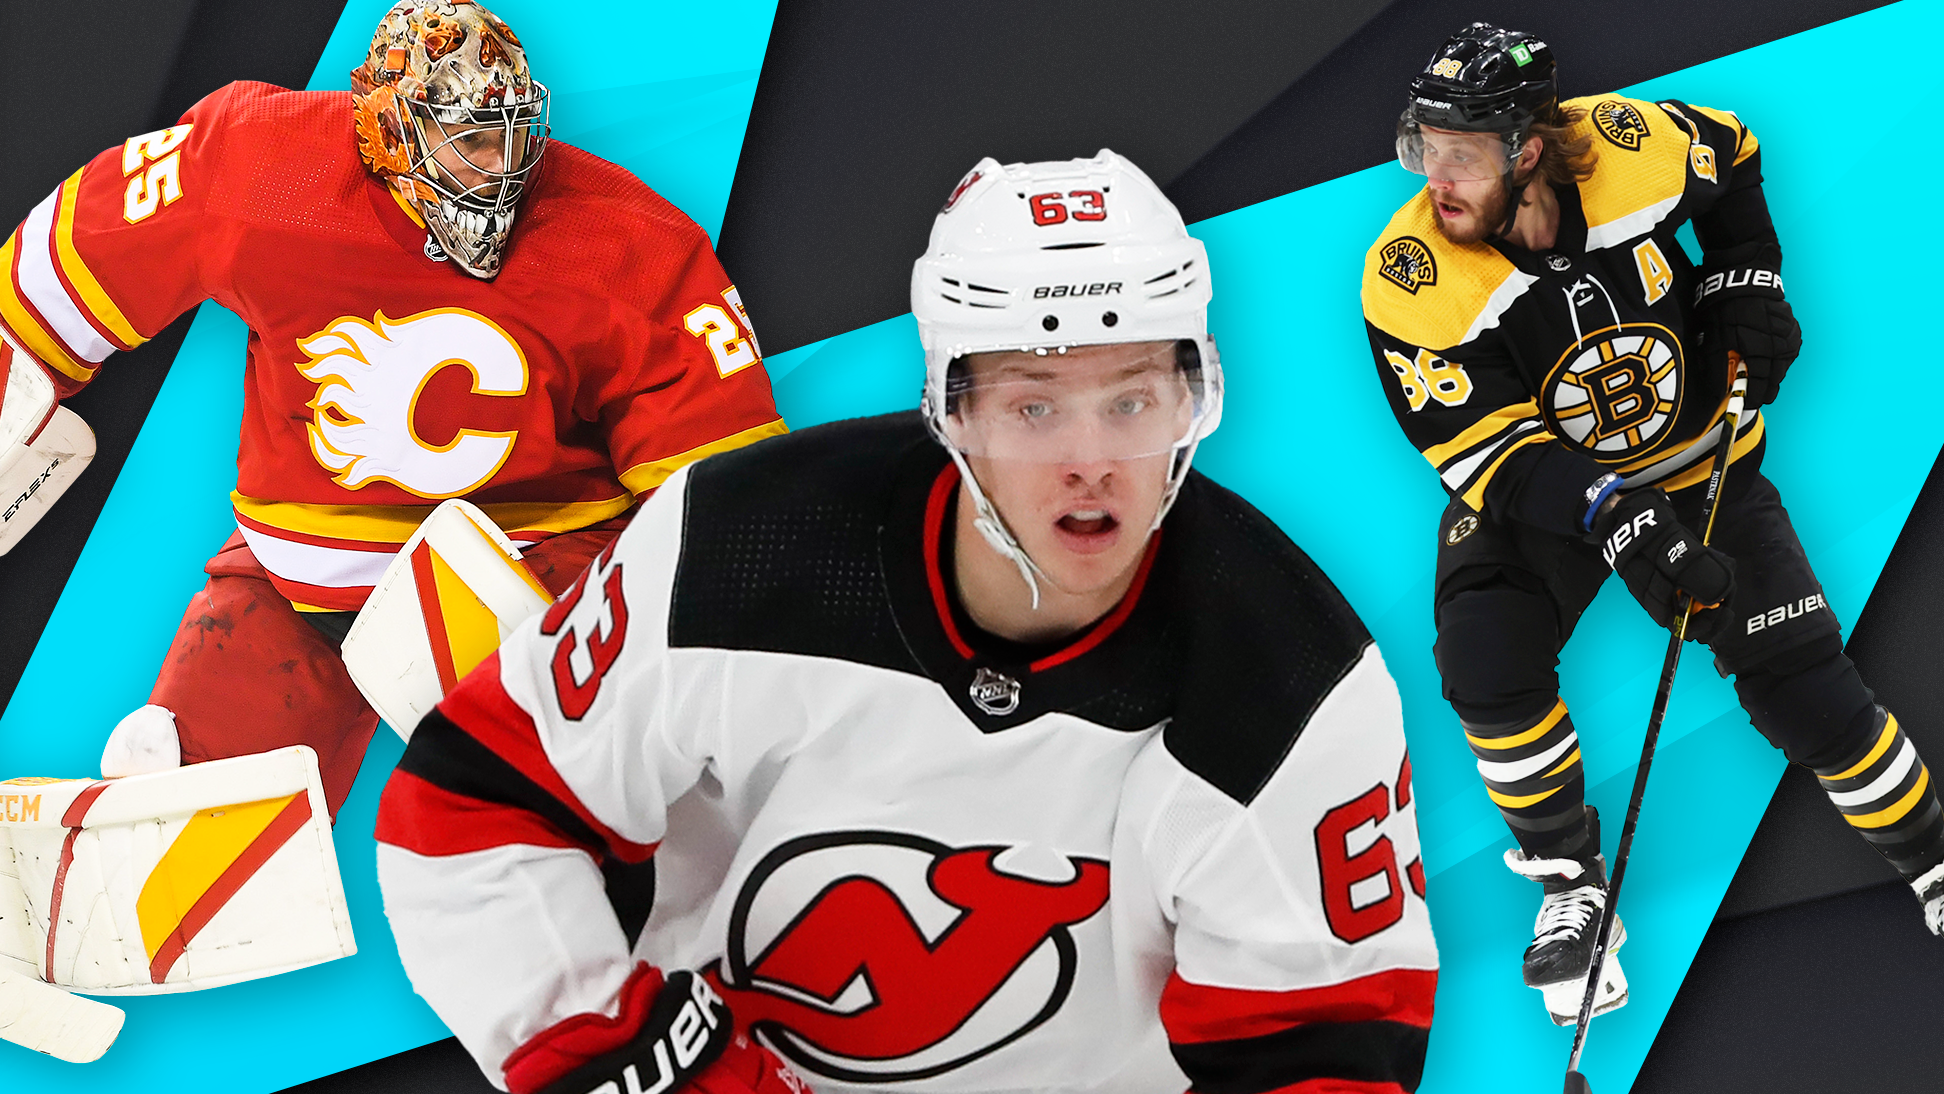 NHL Power Rankings - 1-32 poll, players who must improve - ESPN